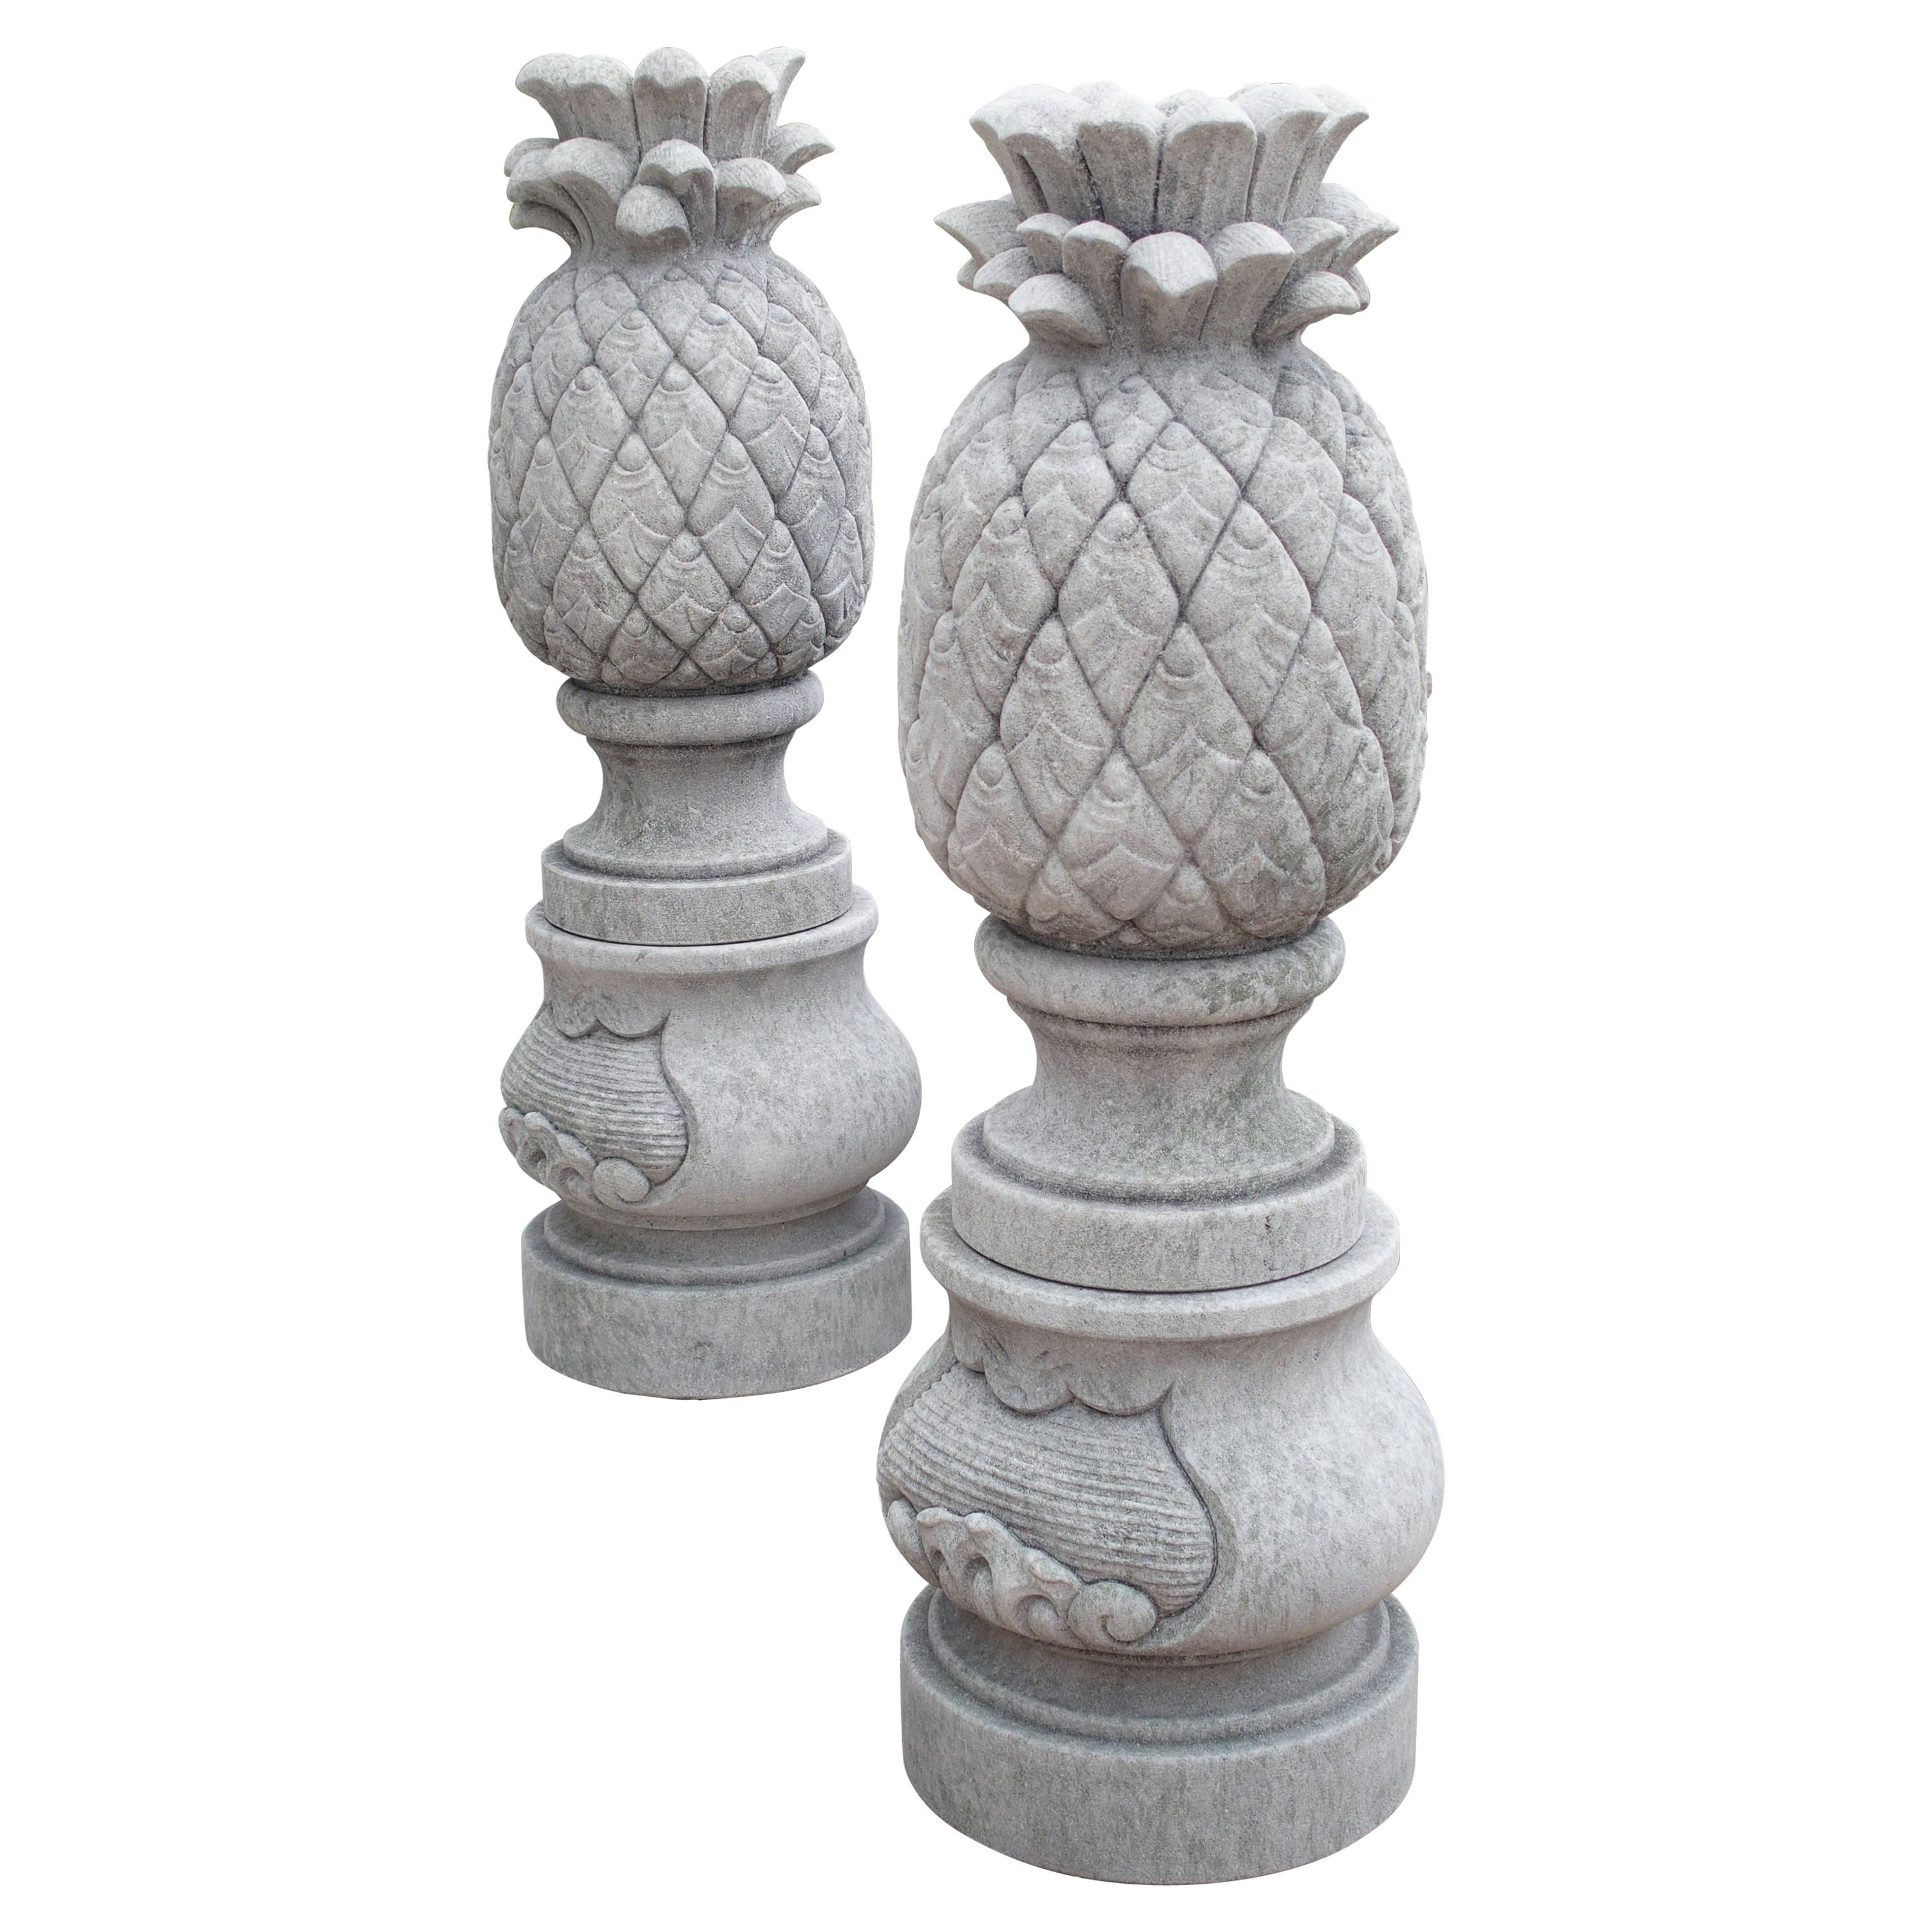 Pair of Carved Limestone Pineapple Finials on Pedestals